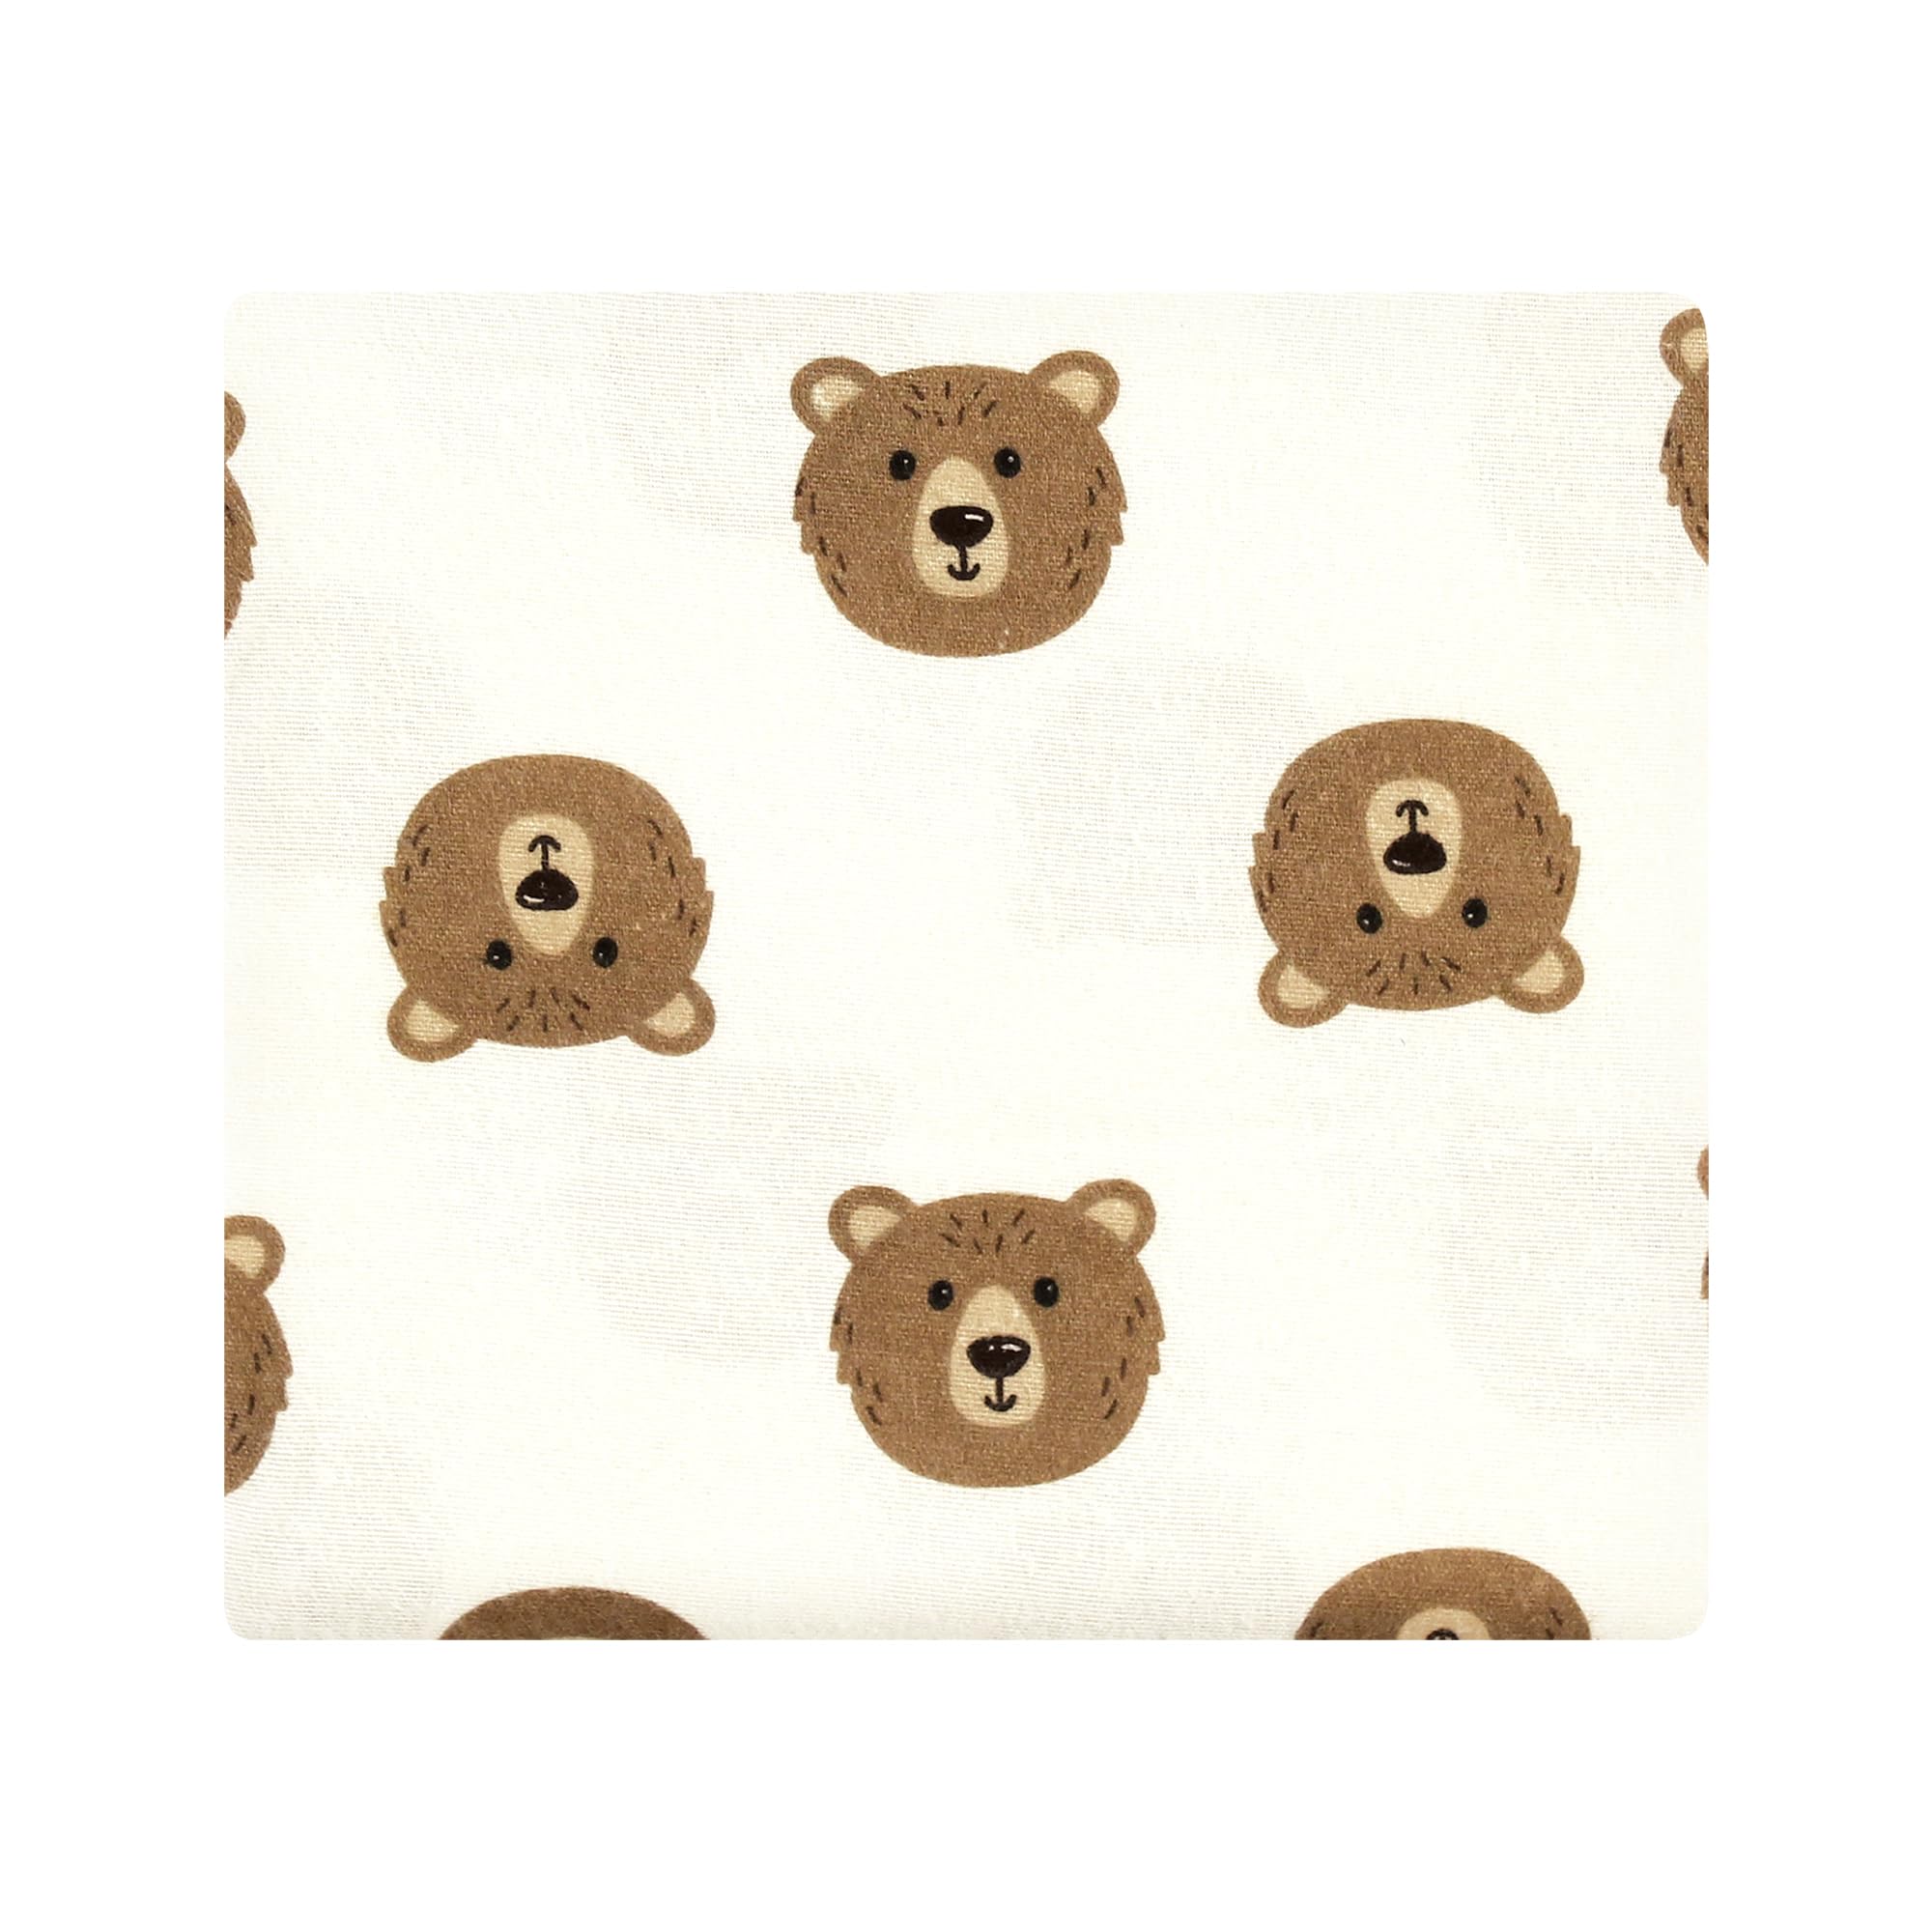 Hudson Baby Unisex Baby Cotton Flannel Receiving Blankets, Brown Bear, One Size